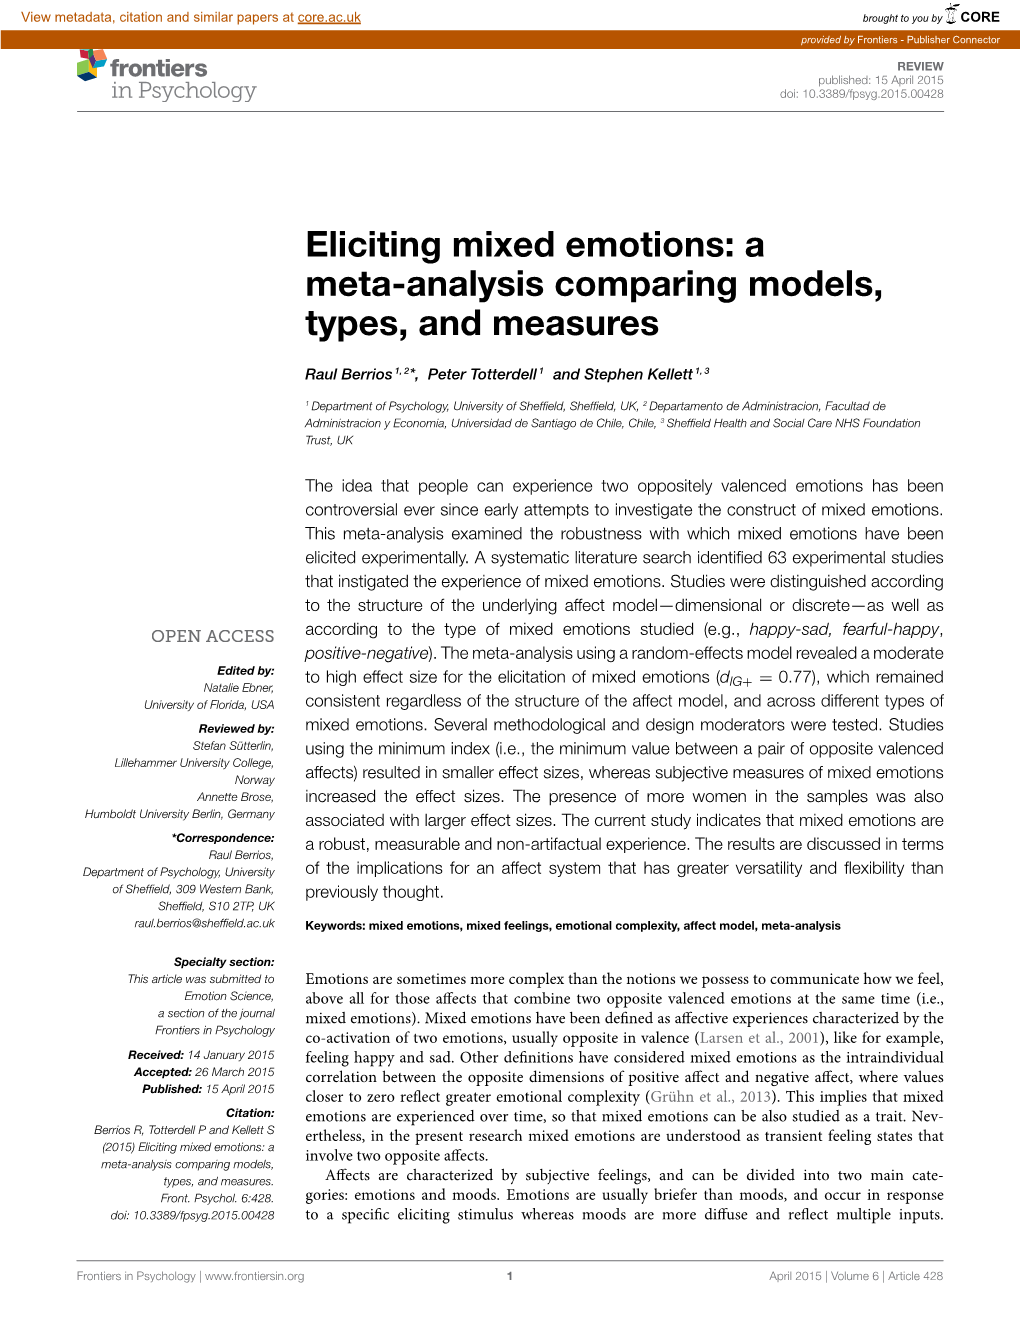 Eliciting Mixed Emotions: a Meta-Analysis Comparing Models, Types, and Measures